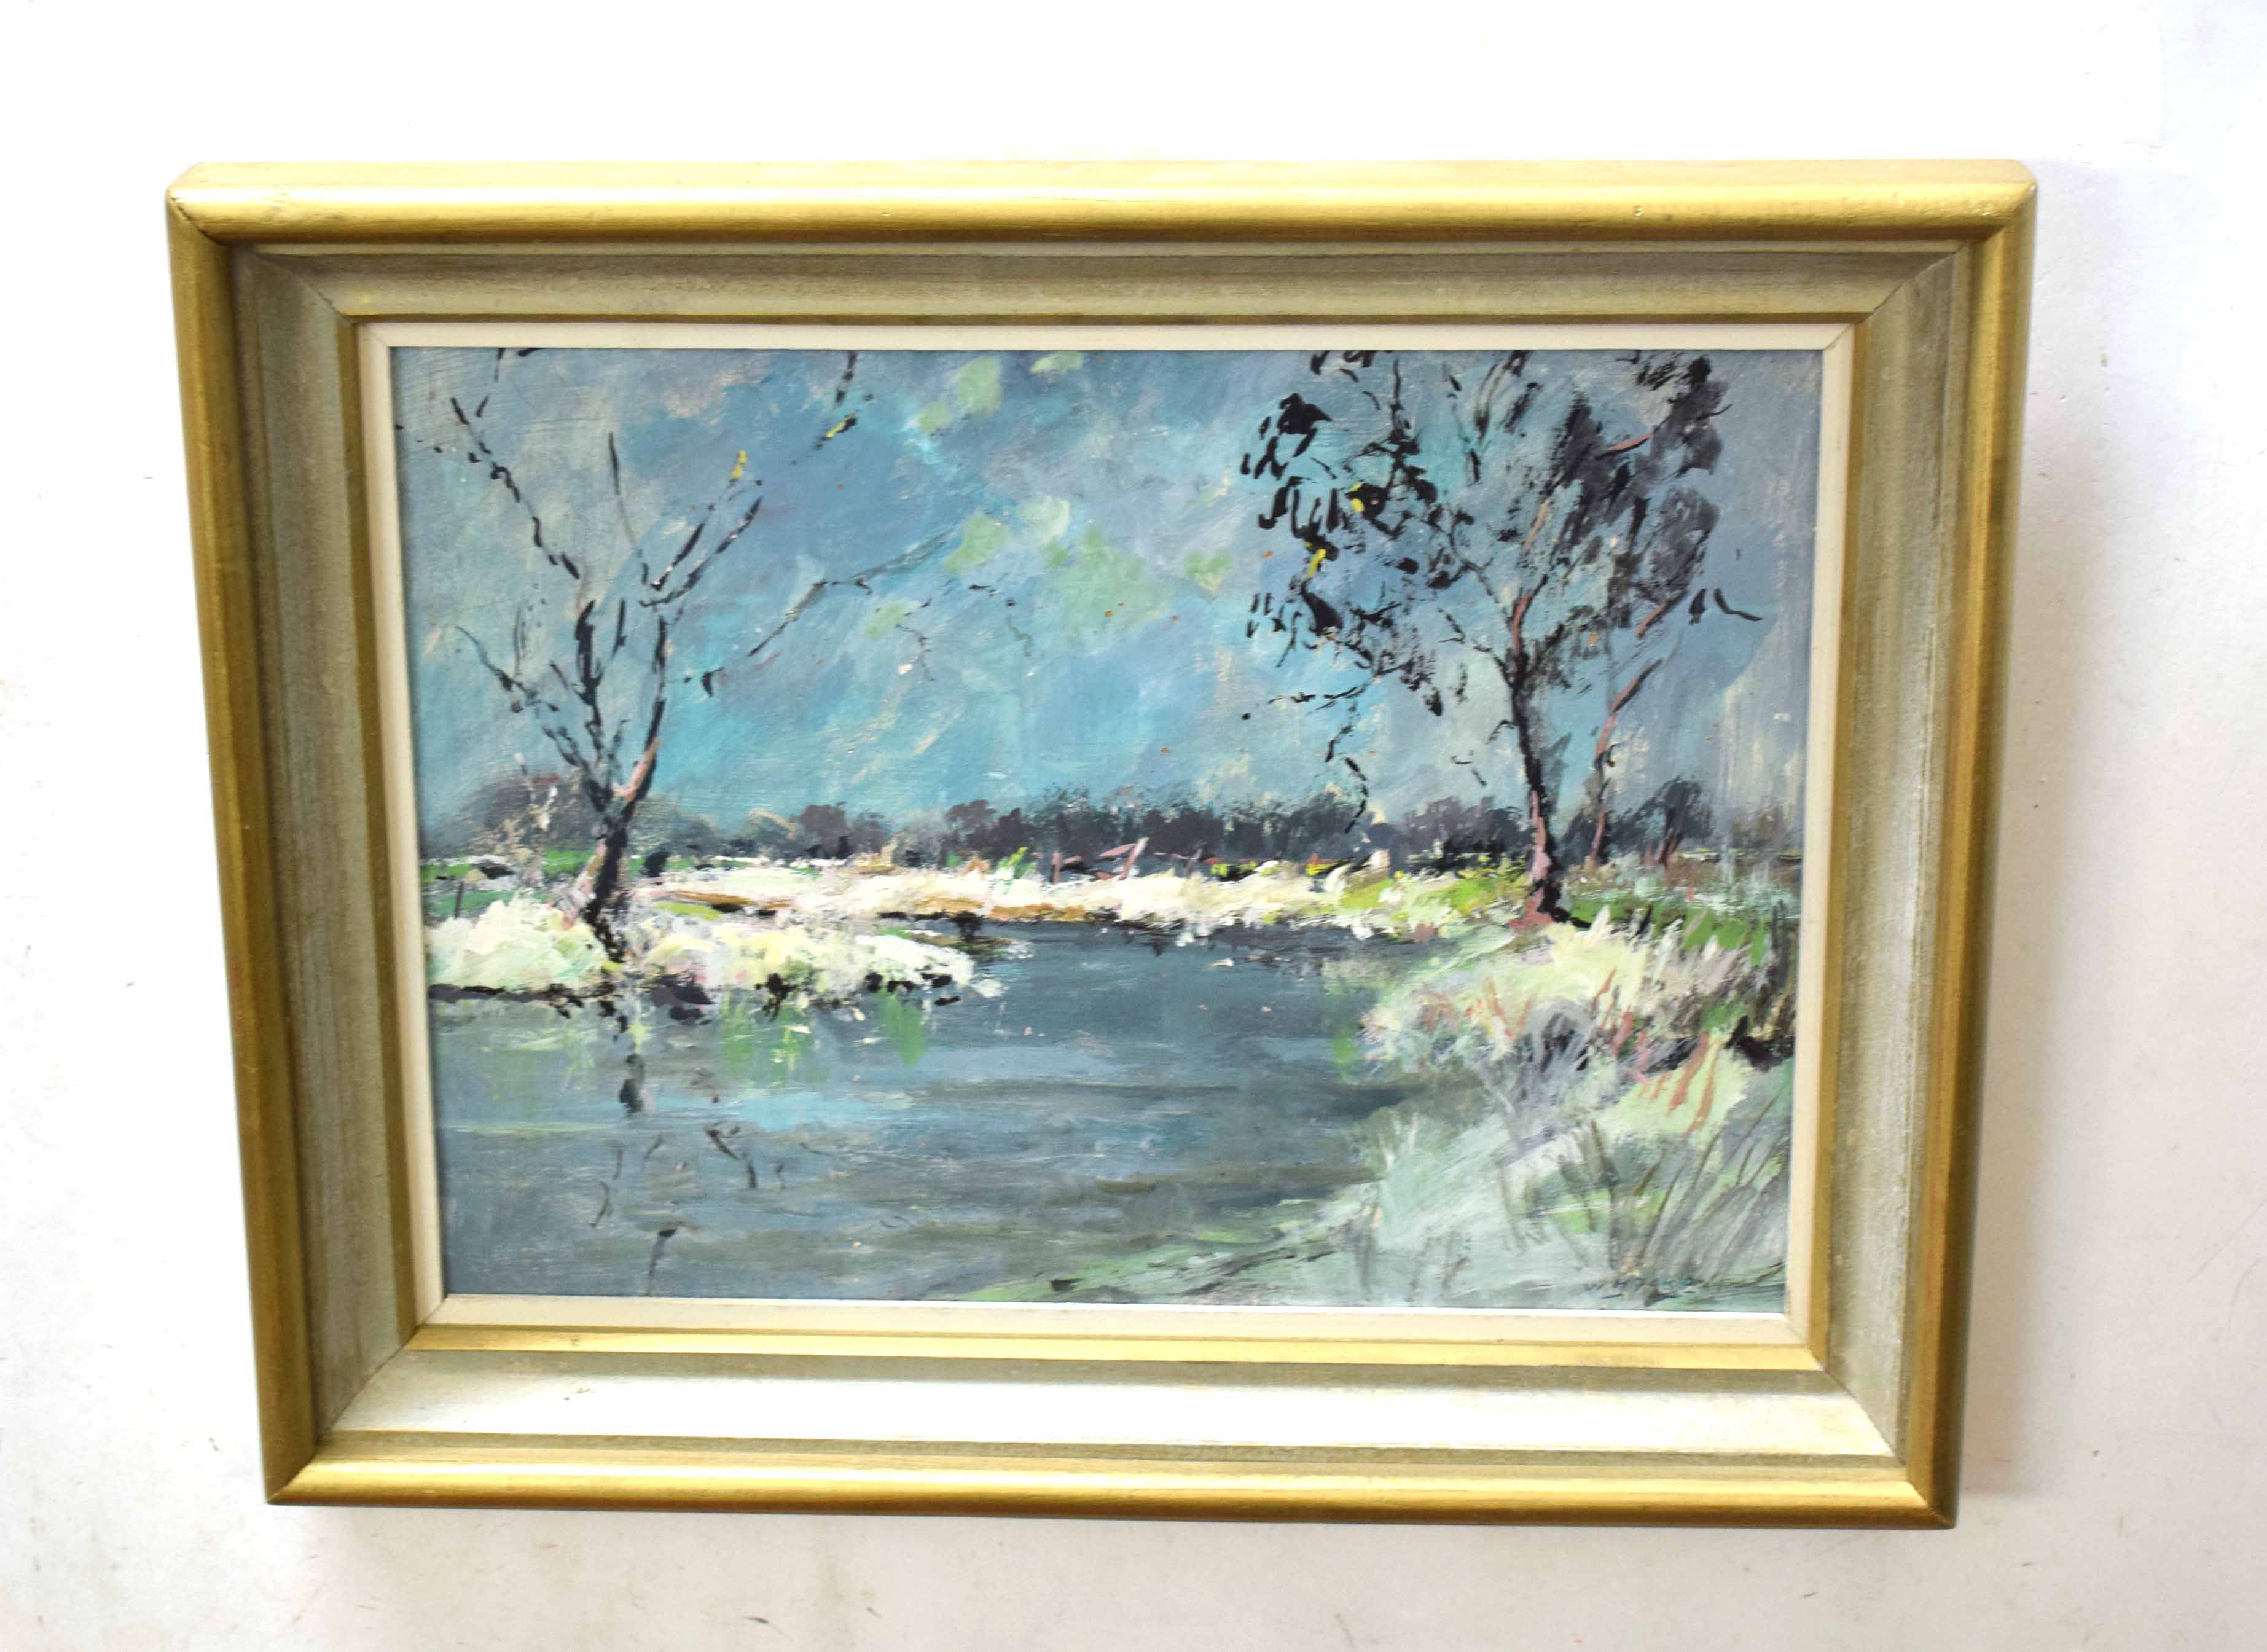 William Henry Ford (20th century) "River Wensum at Ringland" oil on board, signed lower right, 28